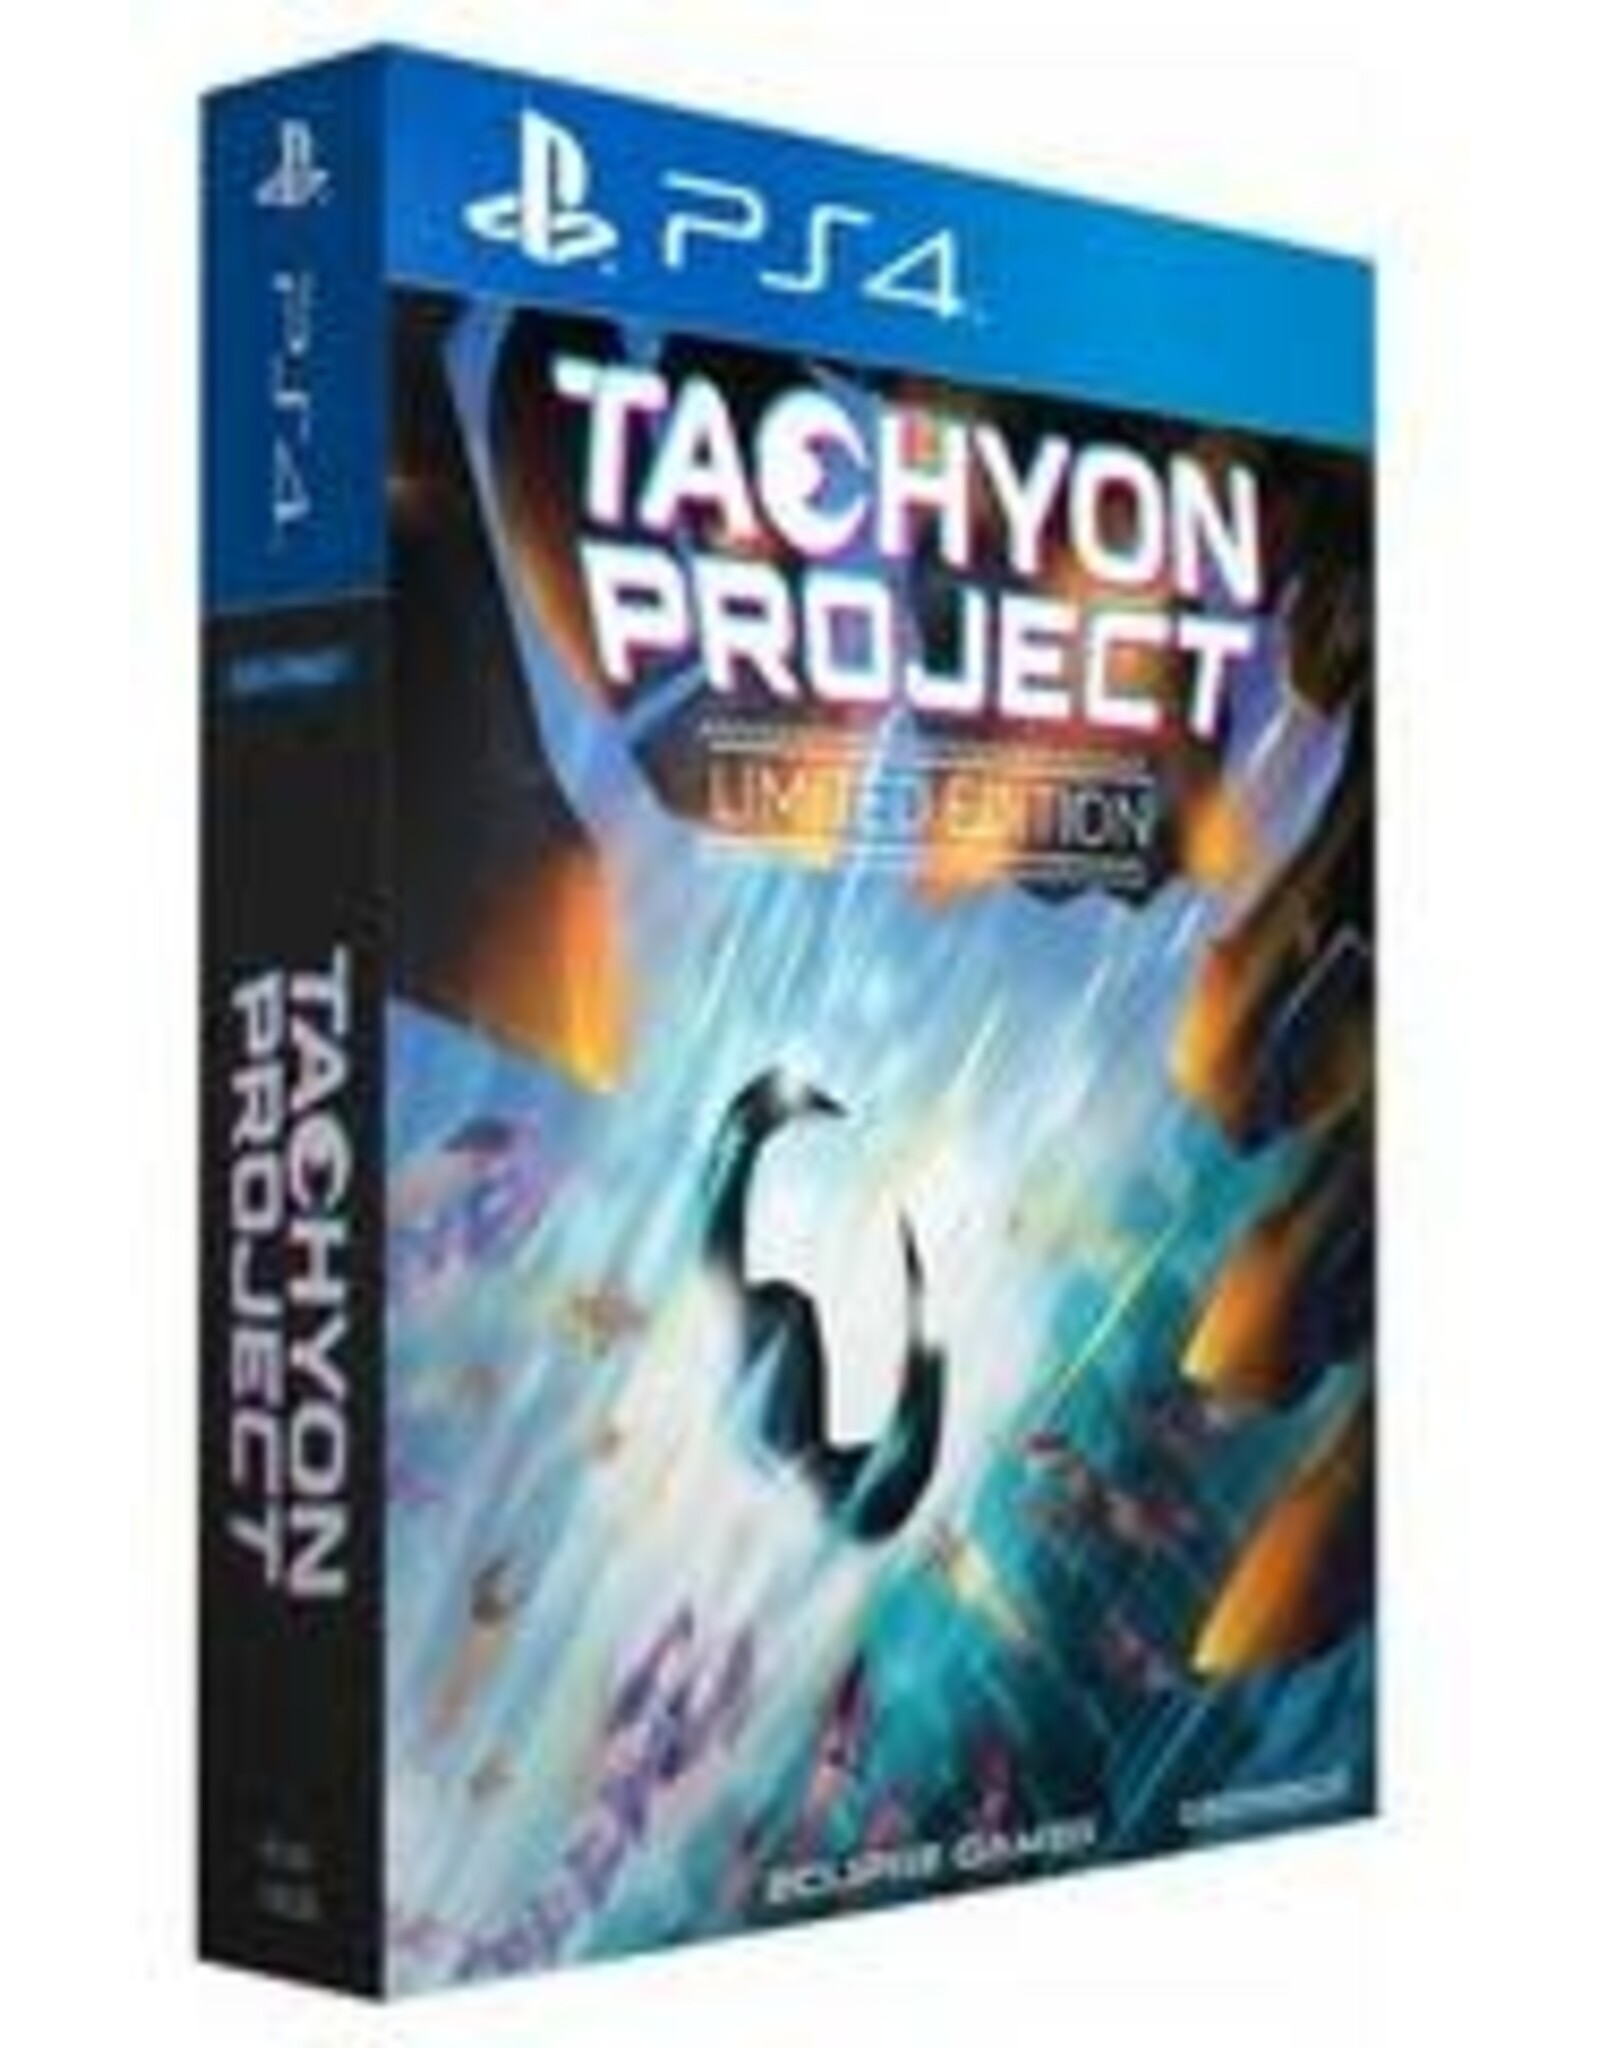 Playstation 4 Tachyon Project Limited Edition - Asia Import (Used)